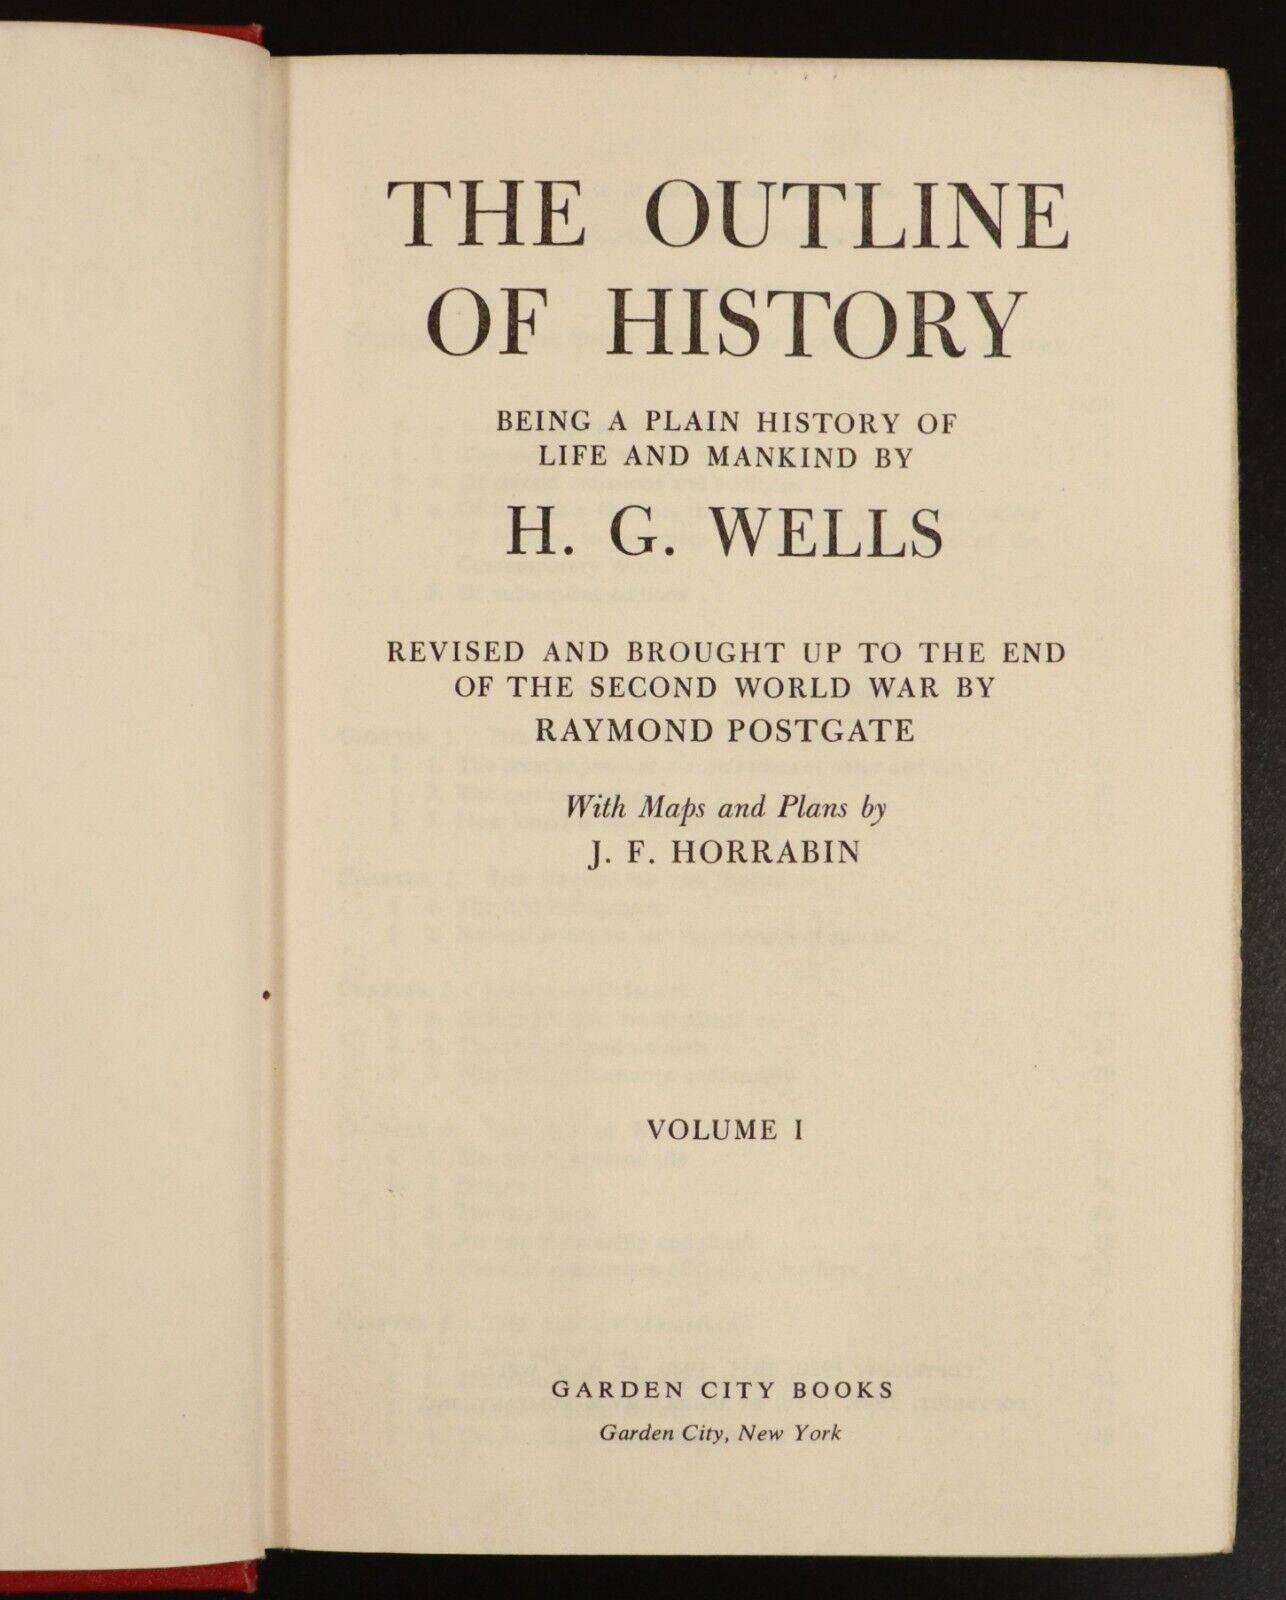 1956 2vol Outline Of History by H.G. Wells Vintage History Reference Book Set - 0